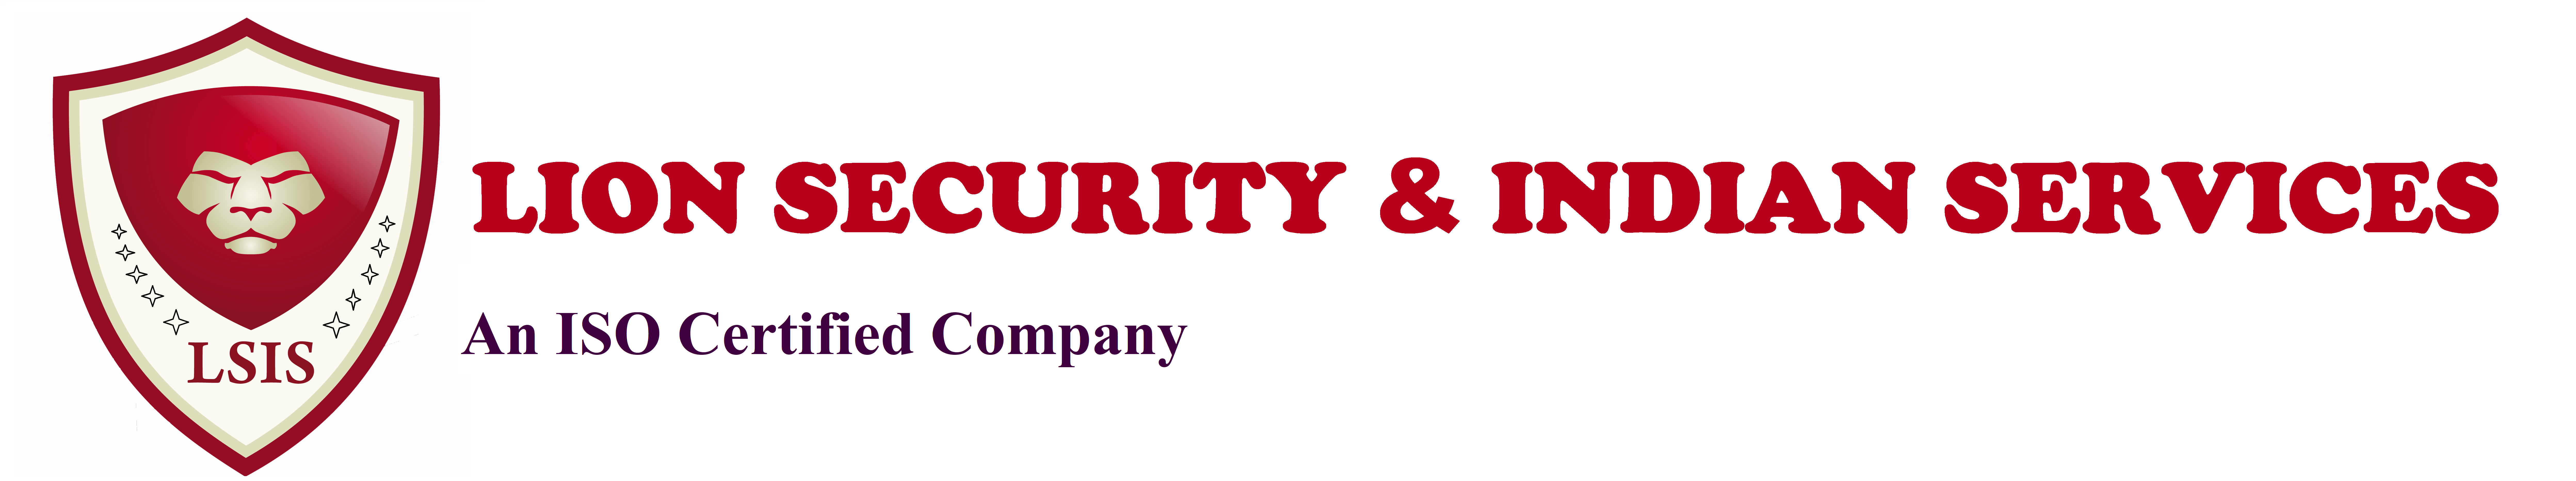 lsis is a security guard company in bangalore